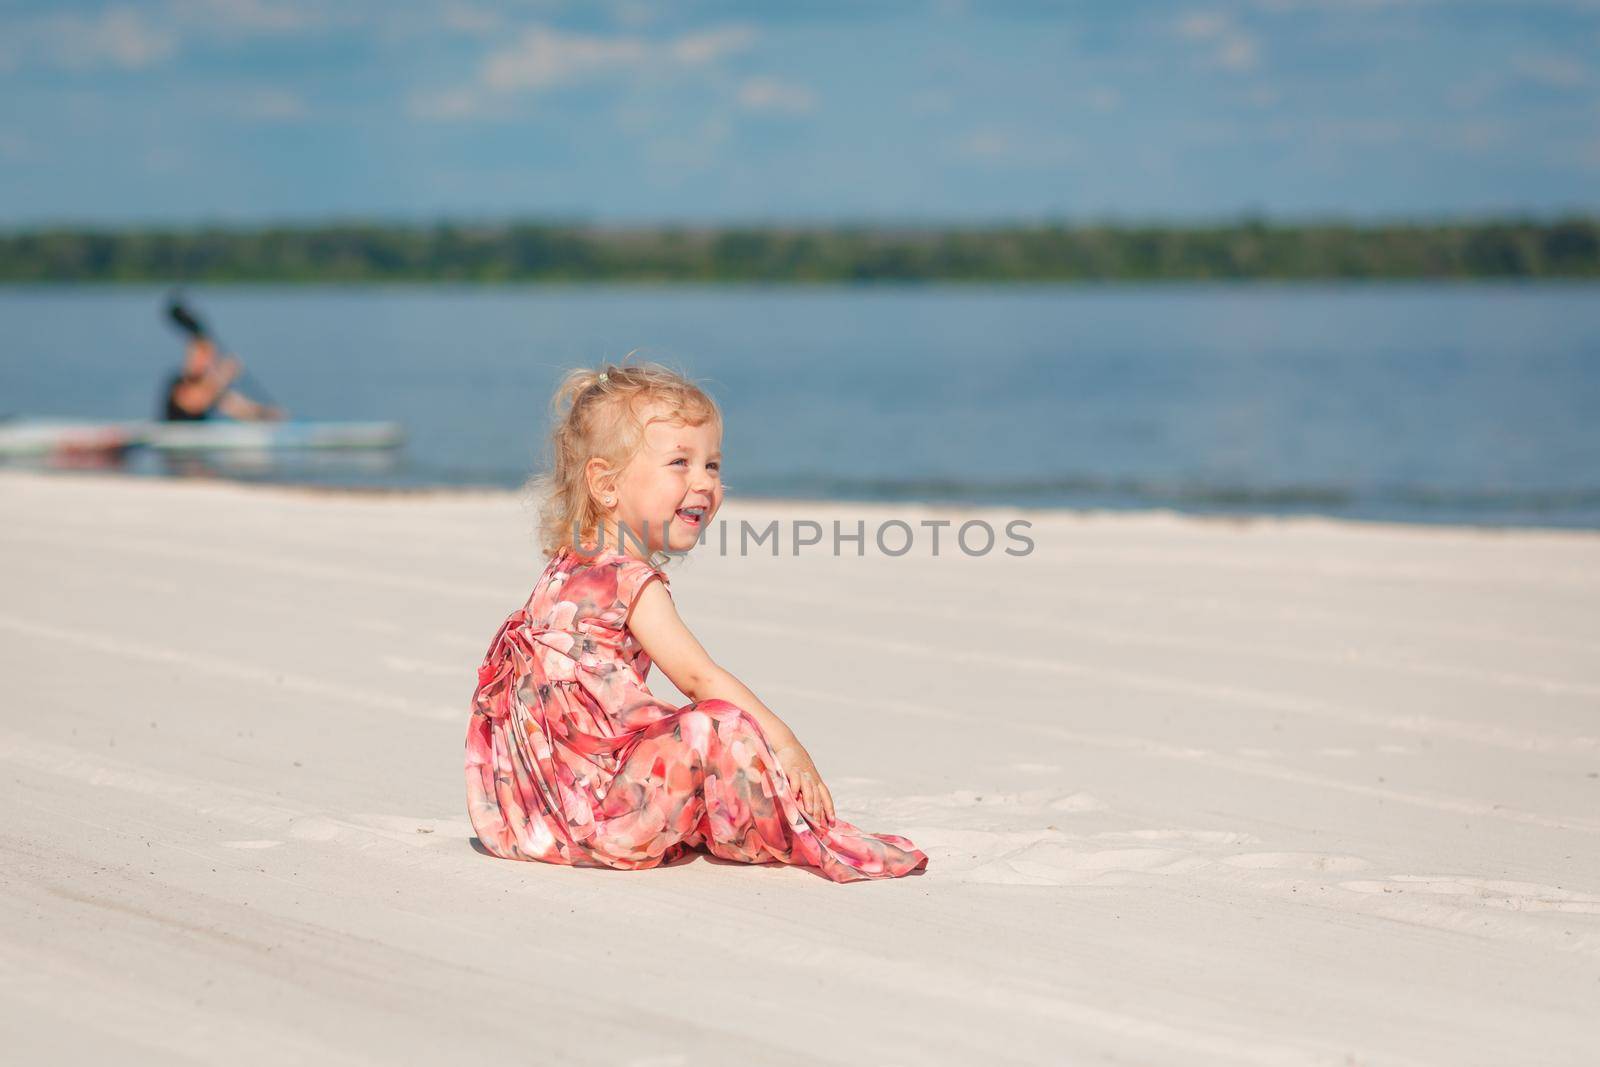 A little girl in a beautiful sarafna plays in the sand on the beach.